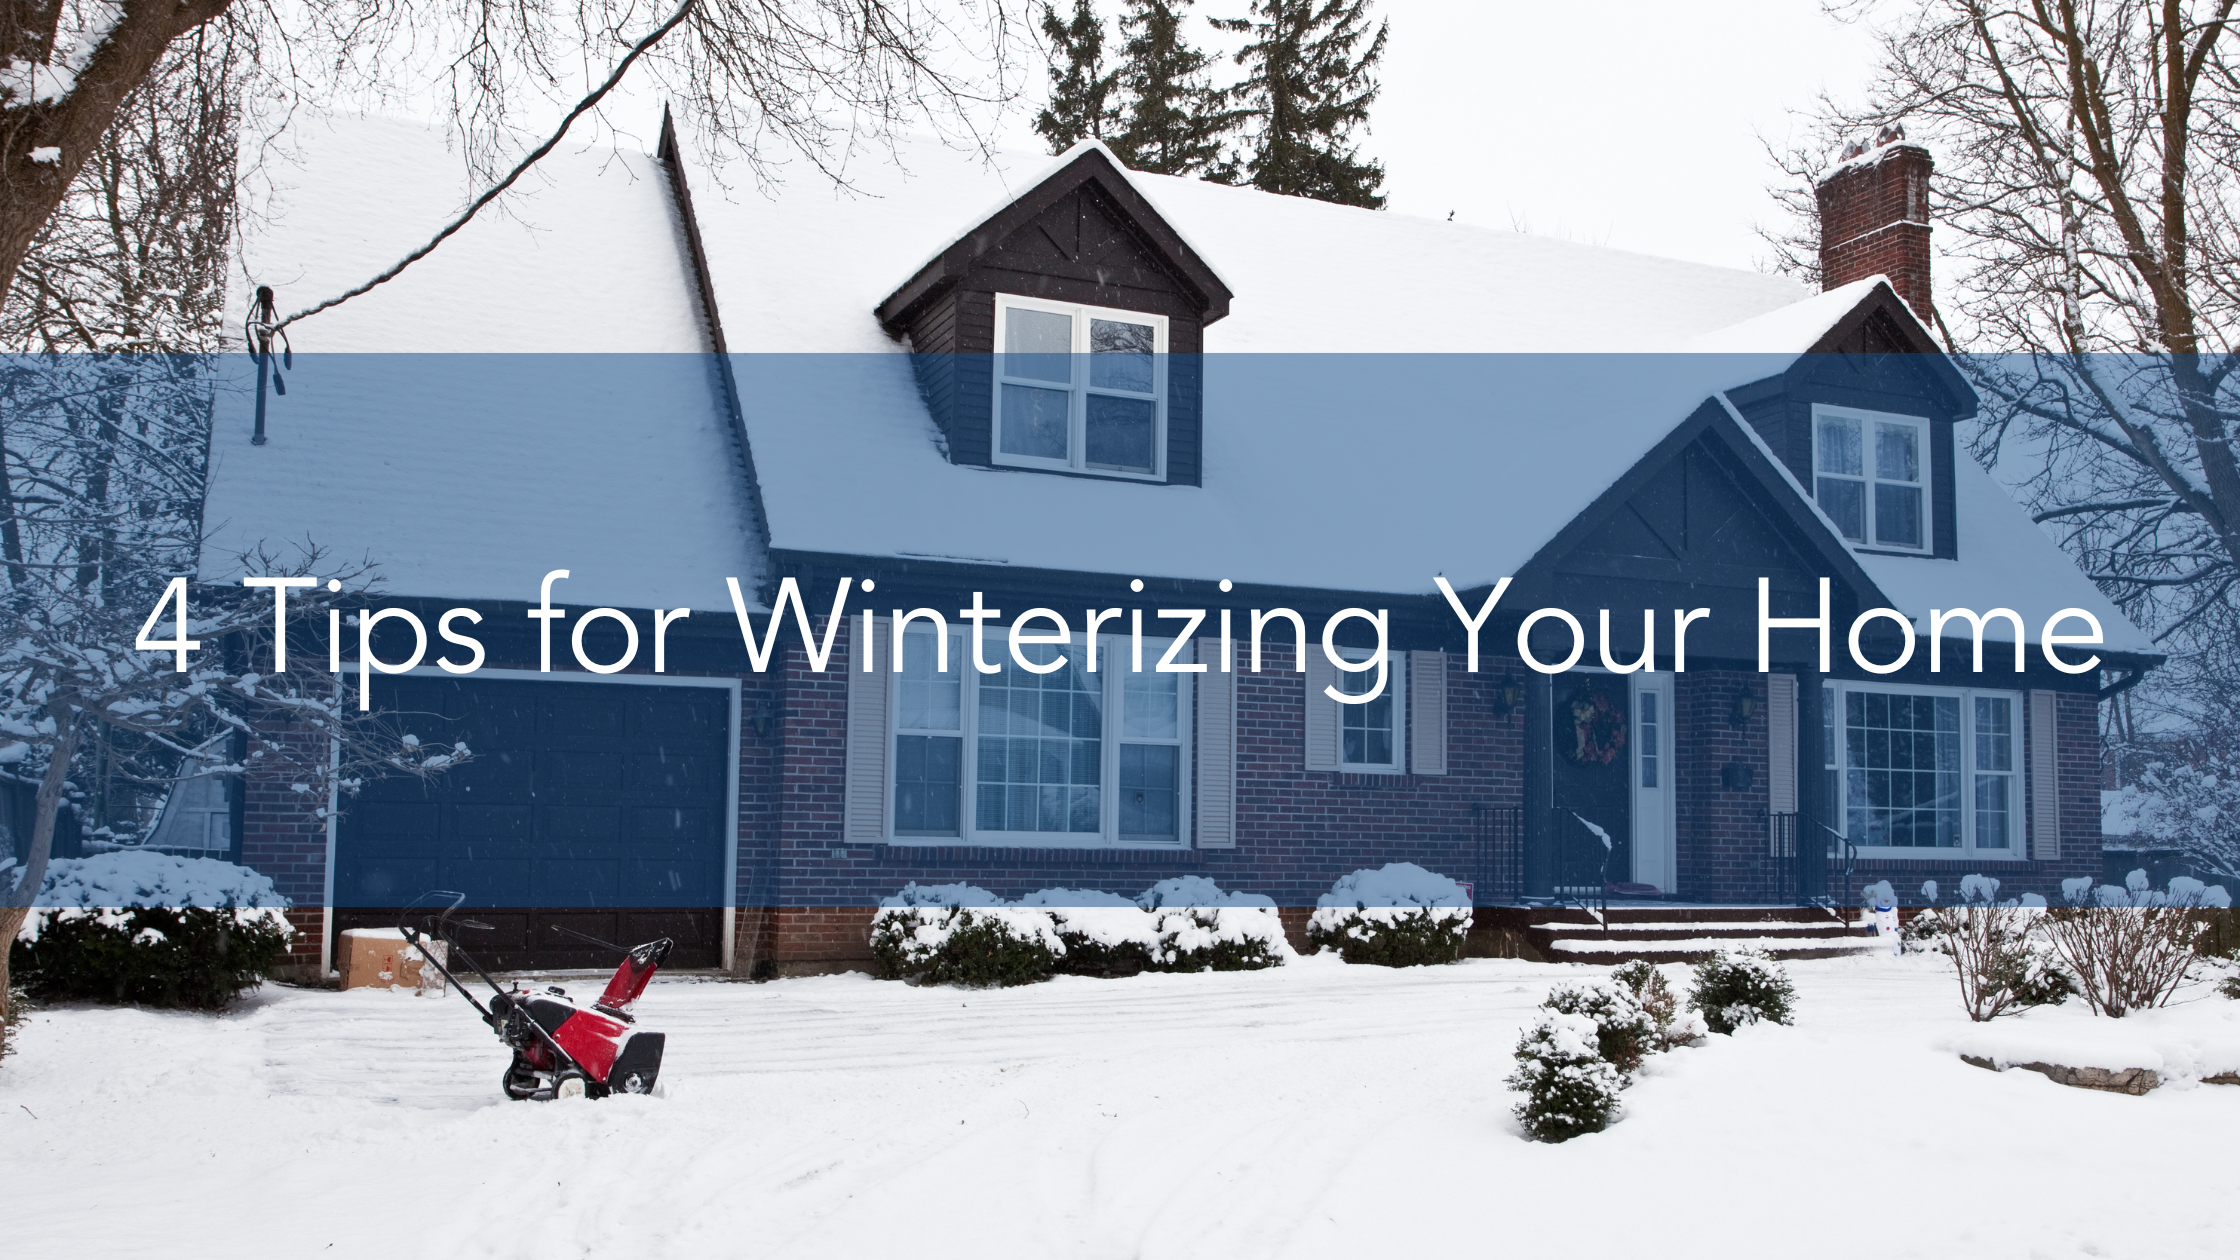 https://雷竞技下载链接官网appwww.explorizers.com/wp-content/uploads/2022/12/4-Tips-for-Winterizing-Your-Home.png